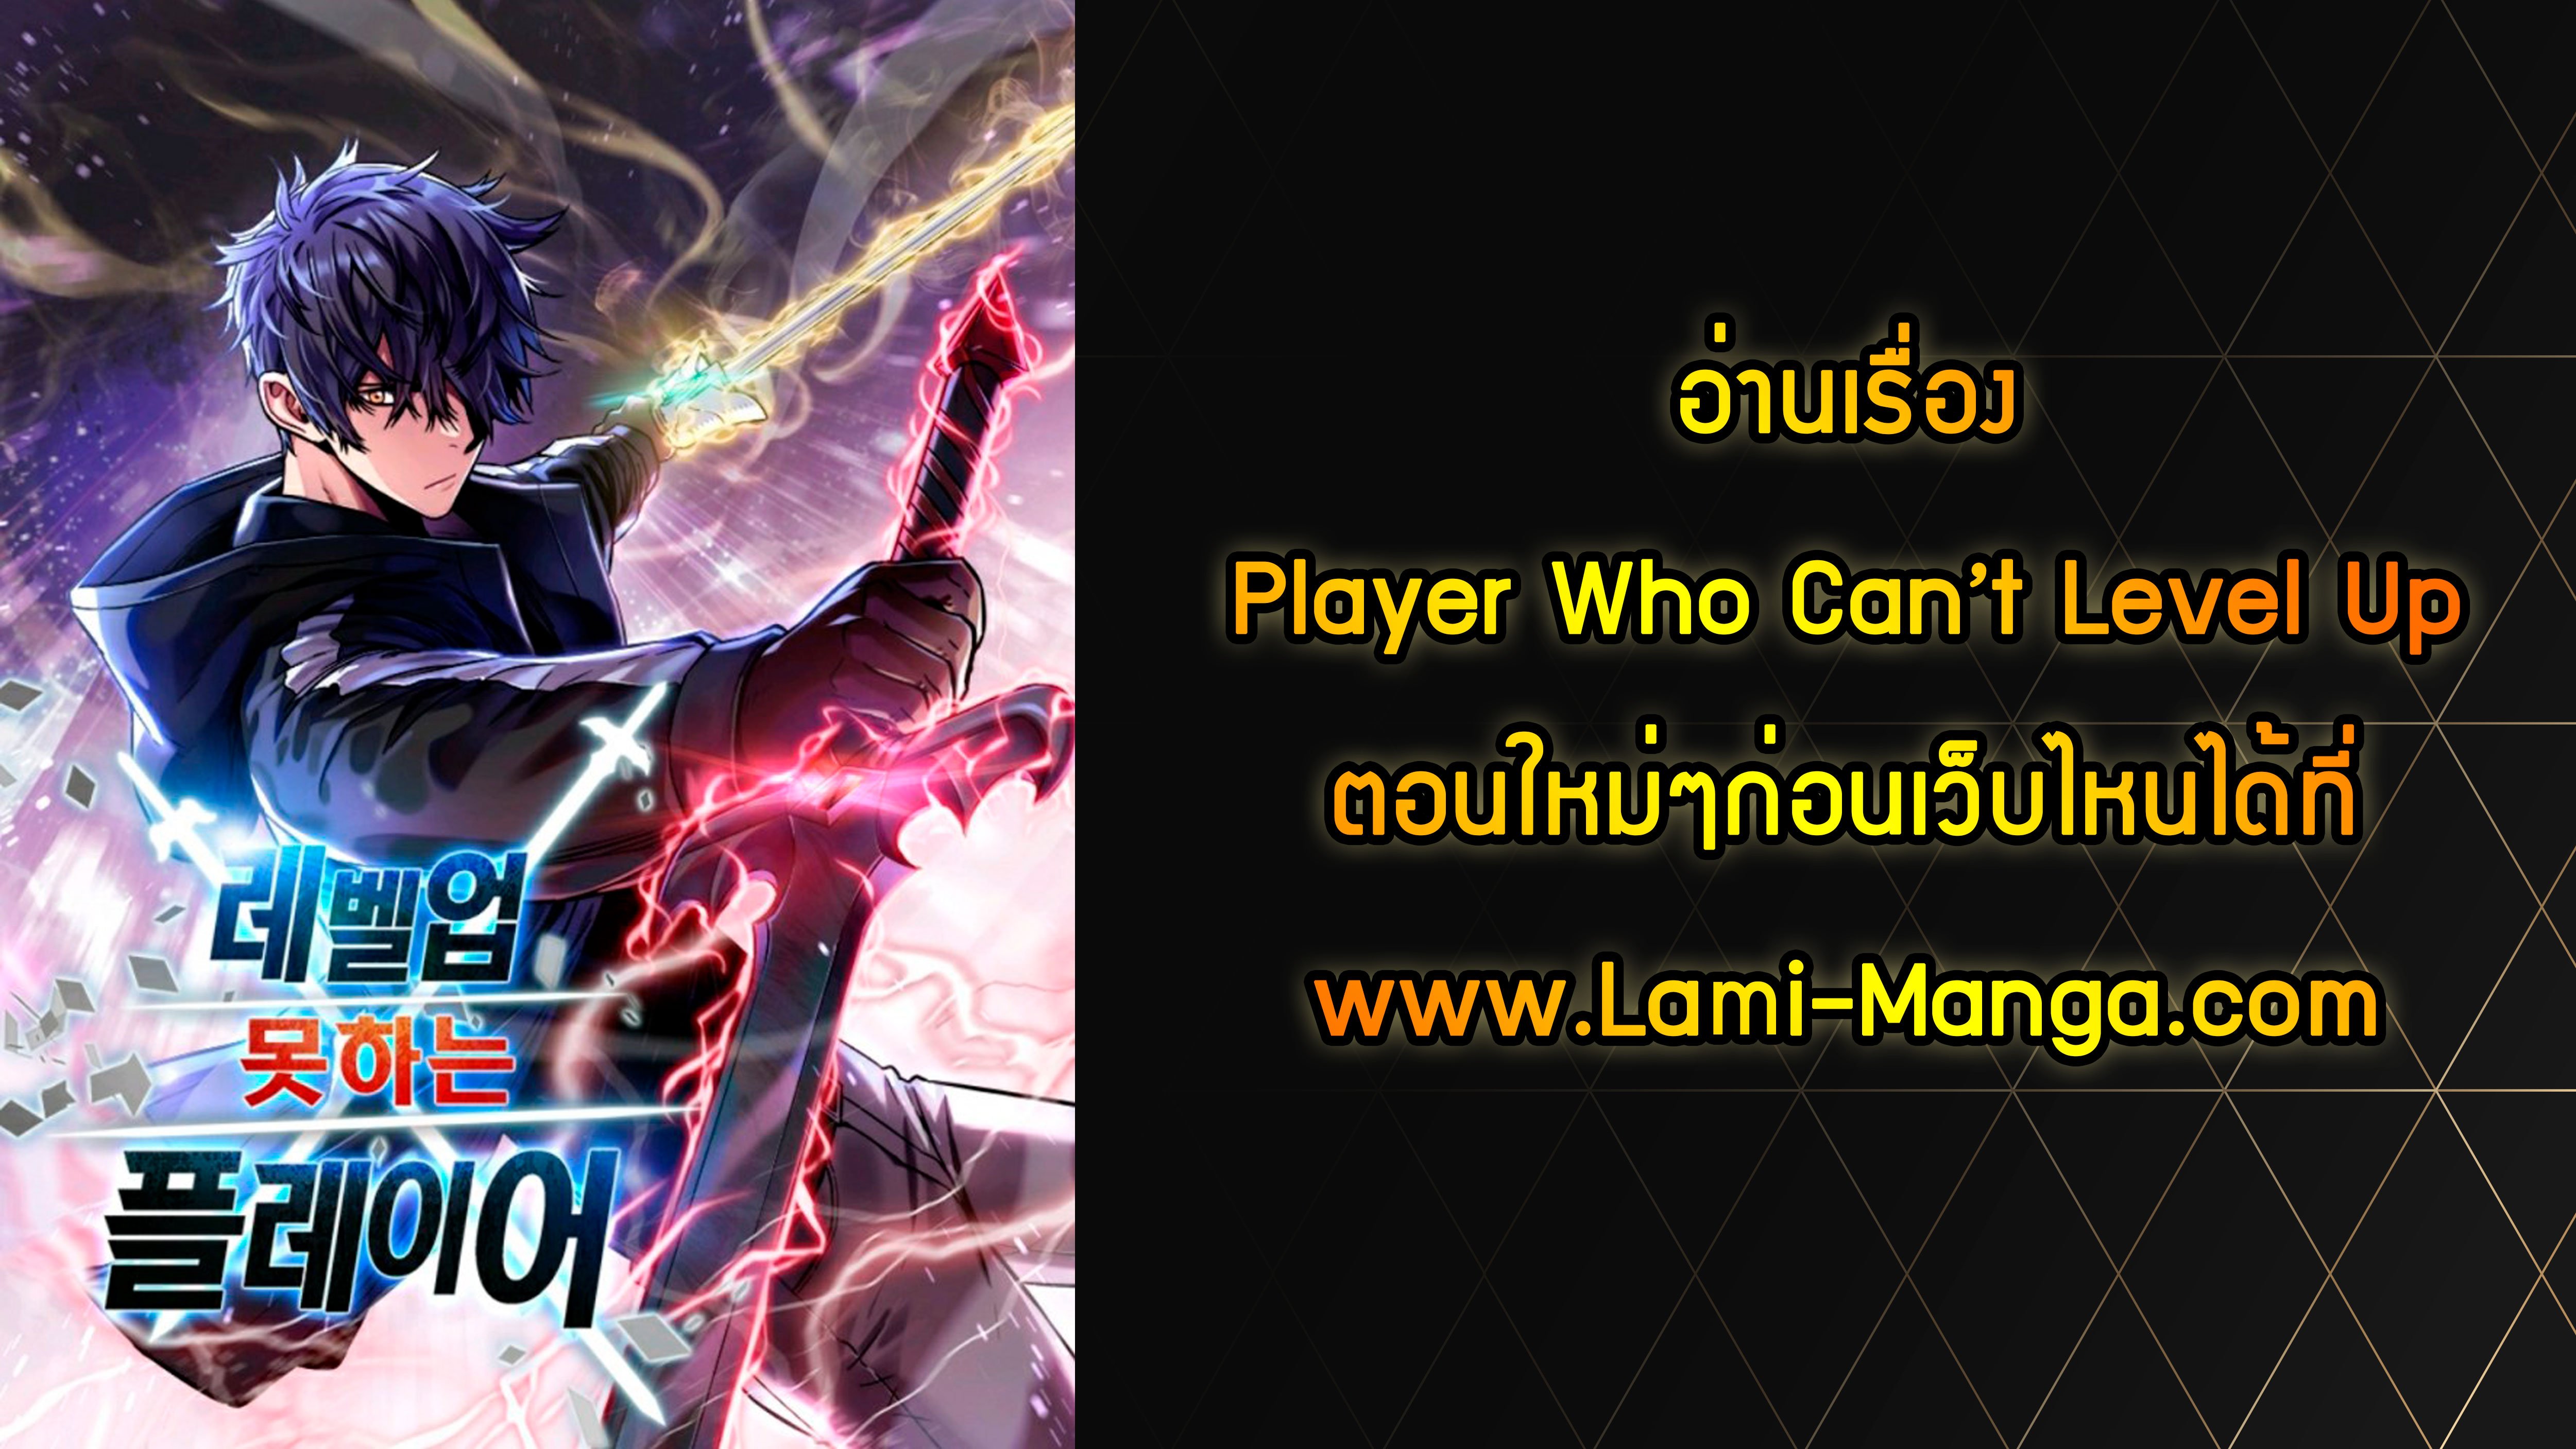 Player Who Can’t Level Up56 6